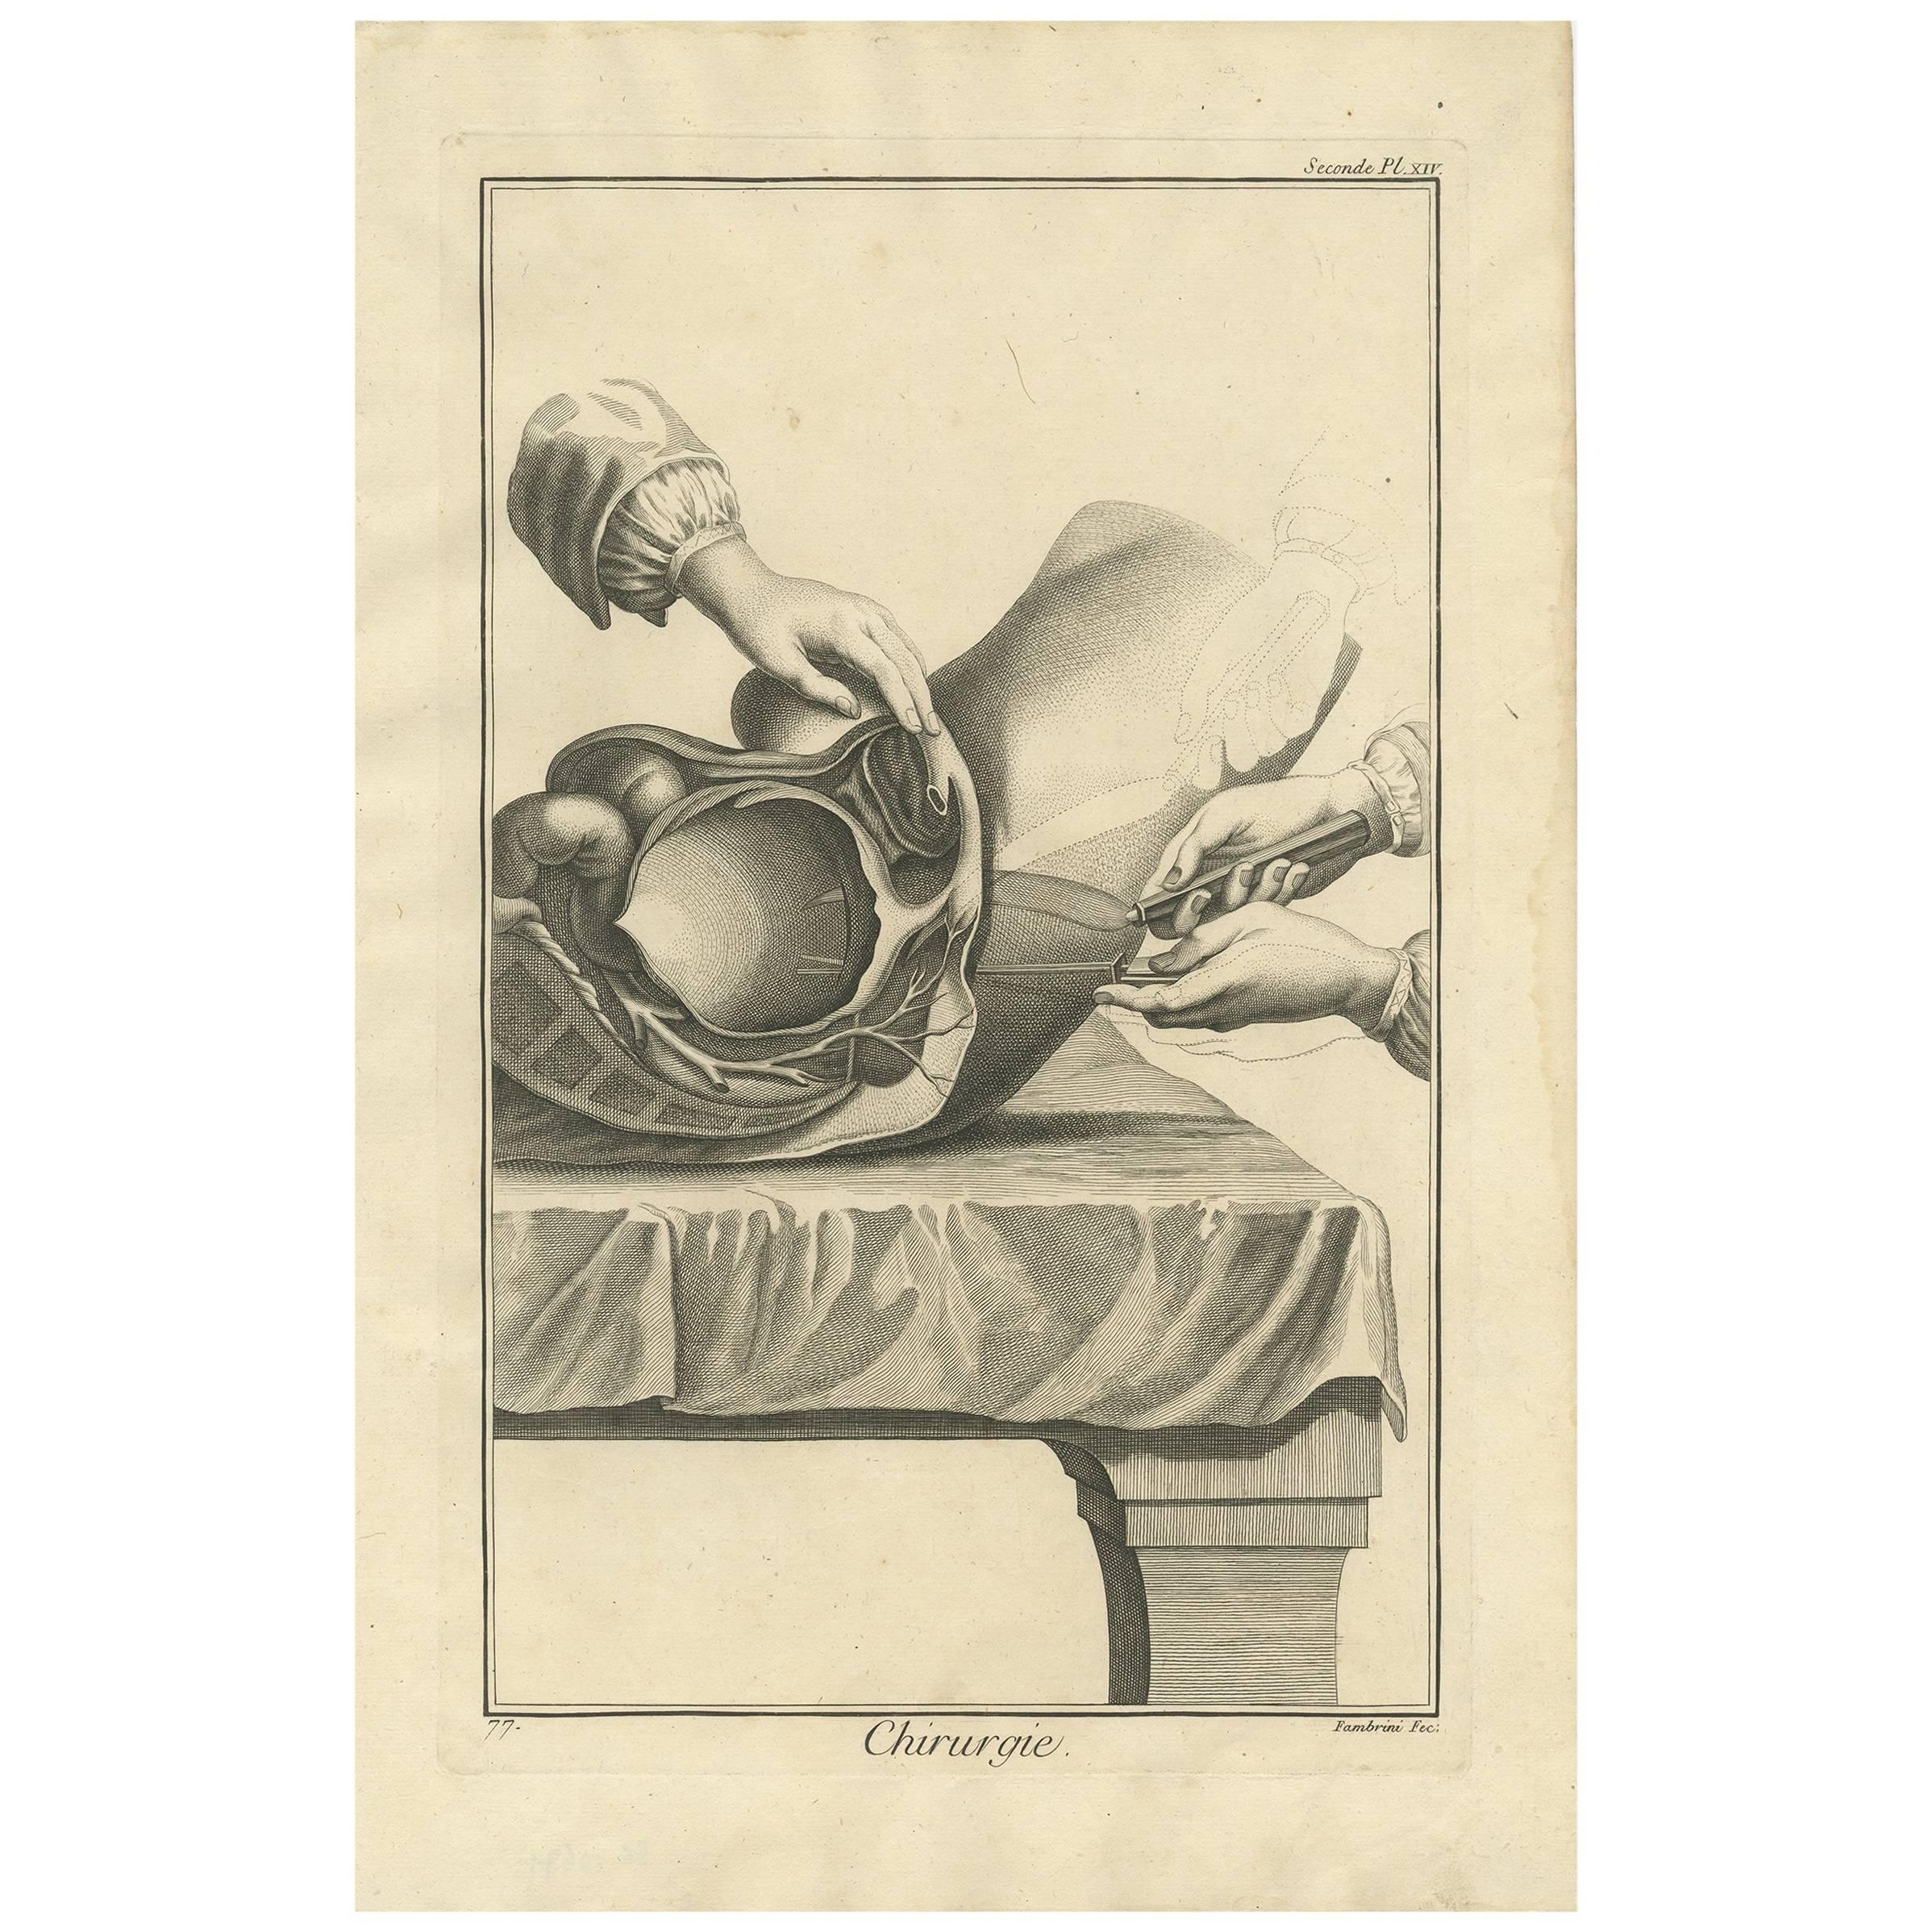 Antique Medical Print 'Seconde Pl. XIV' by D. Diderot, circa 1760